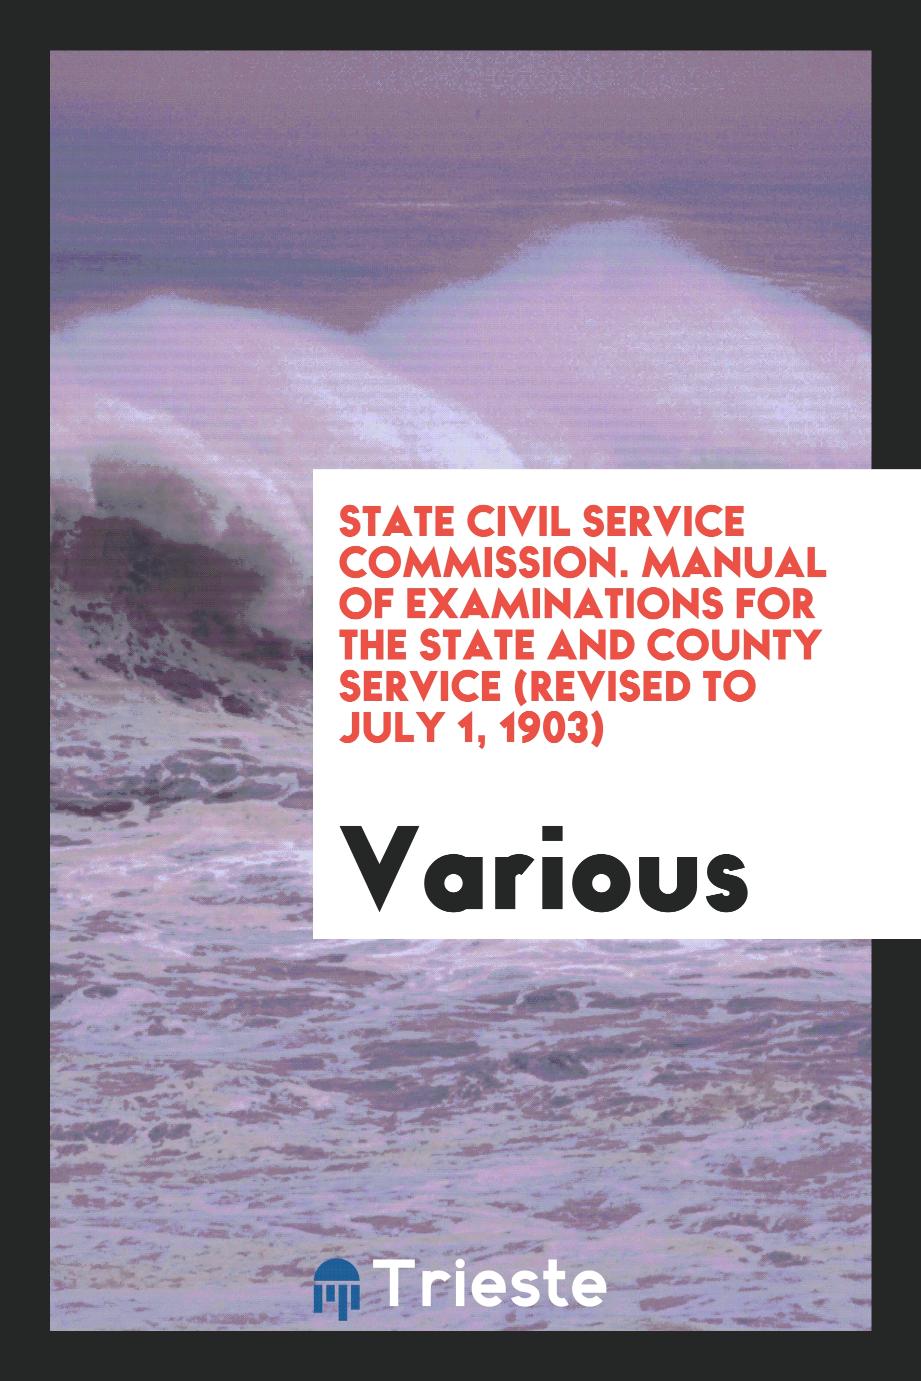 State Civil Service Commission. Manual of Examinations for the State and County Service (Revised to July 1, 1903)